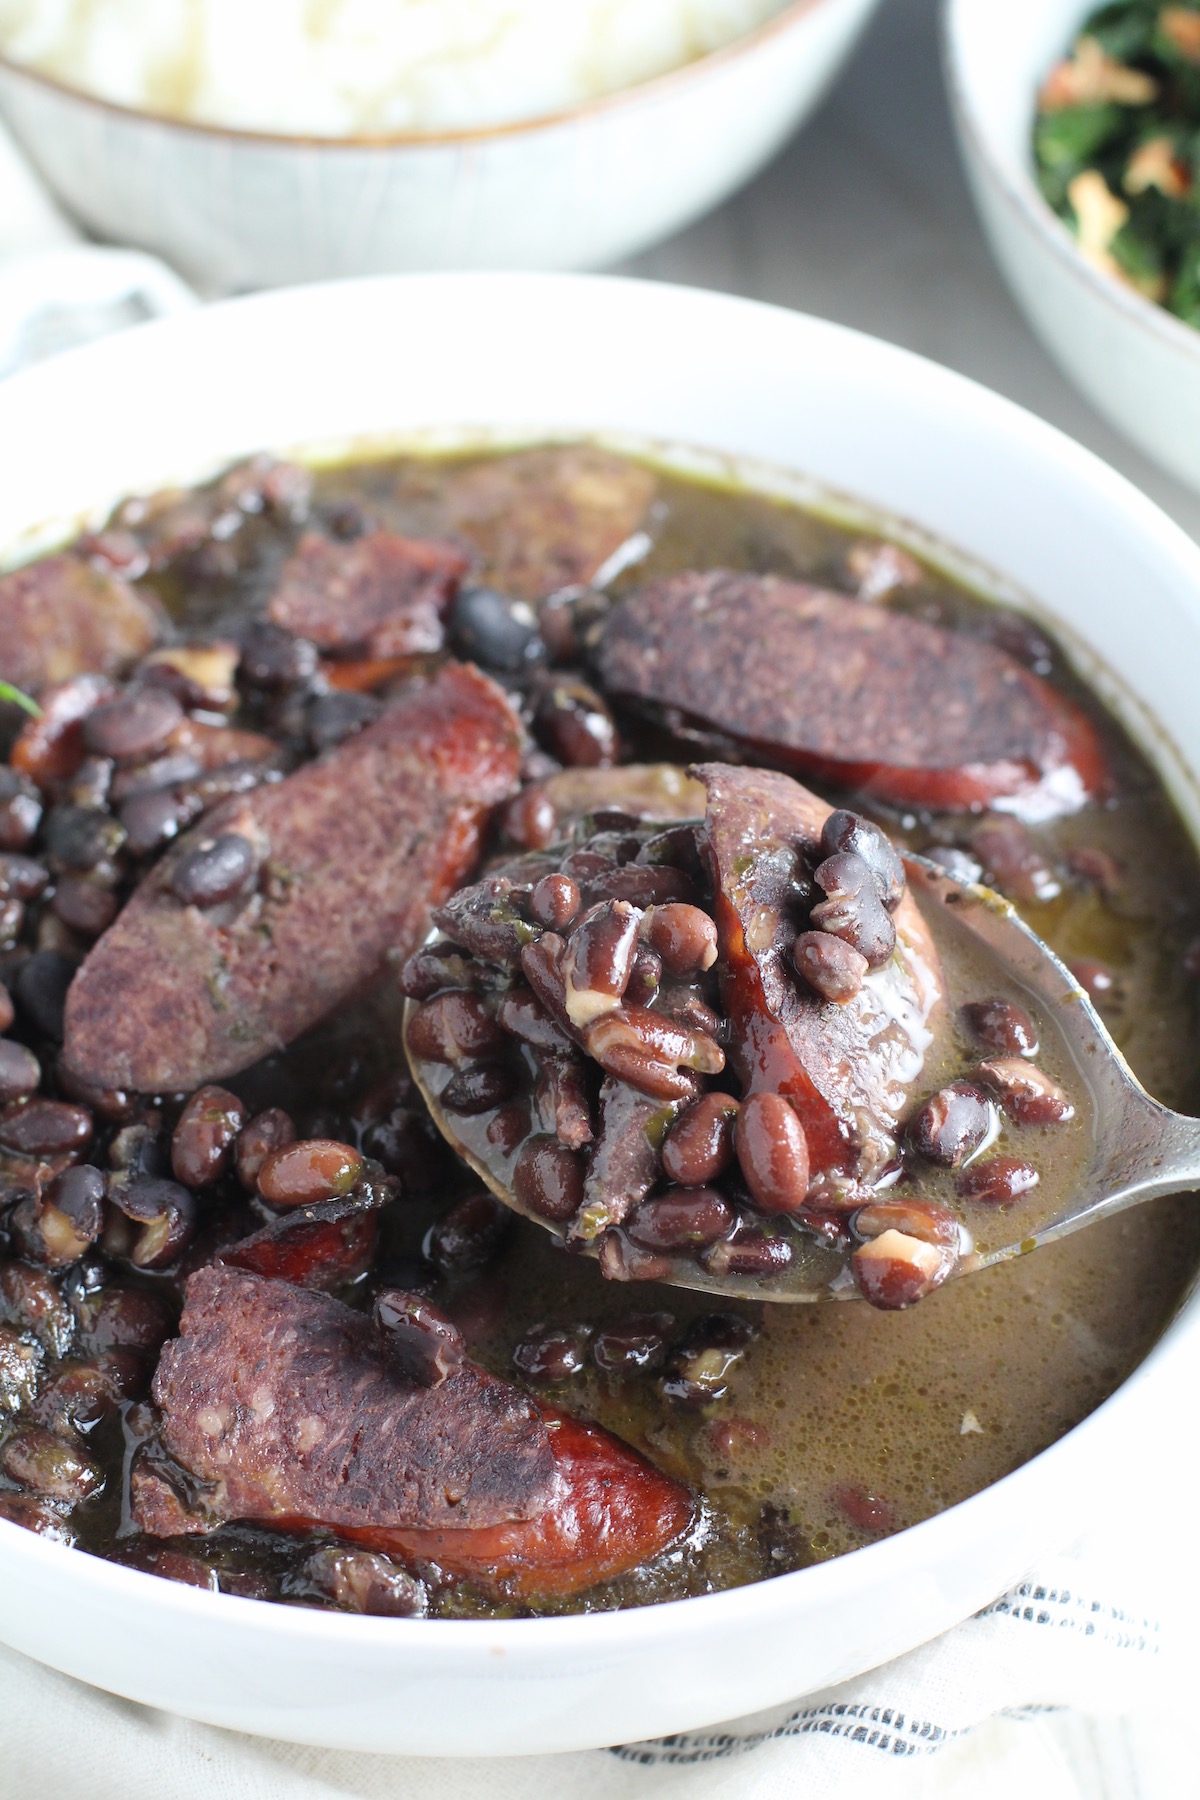 Serving spoon scooping up cooked black beans with pork sausage and beef in a white bowl. Feijoada is rice and beans Brazilian style with pork sausages, beef, and more.